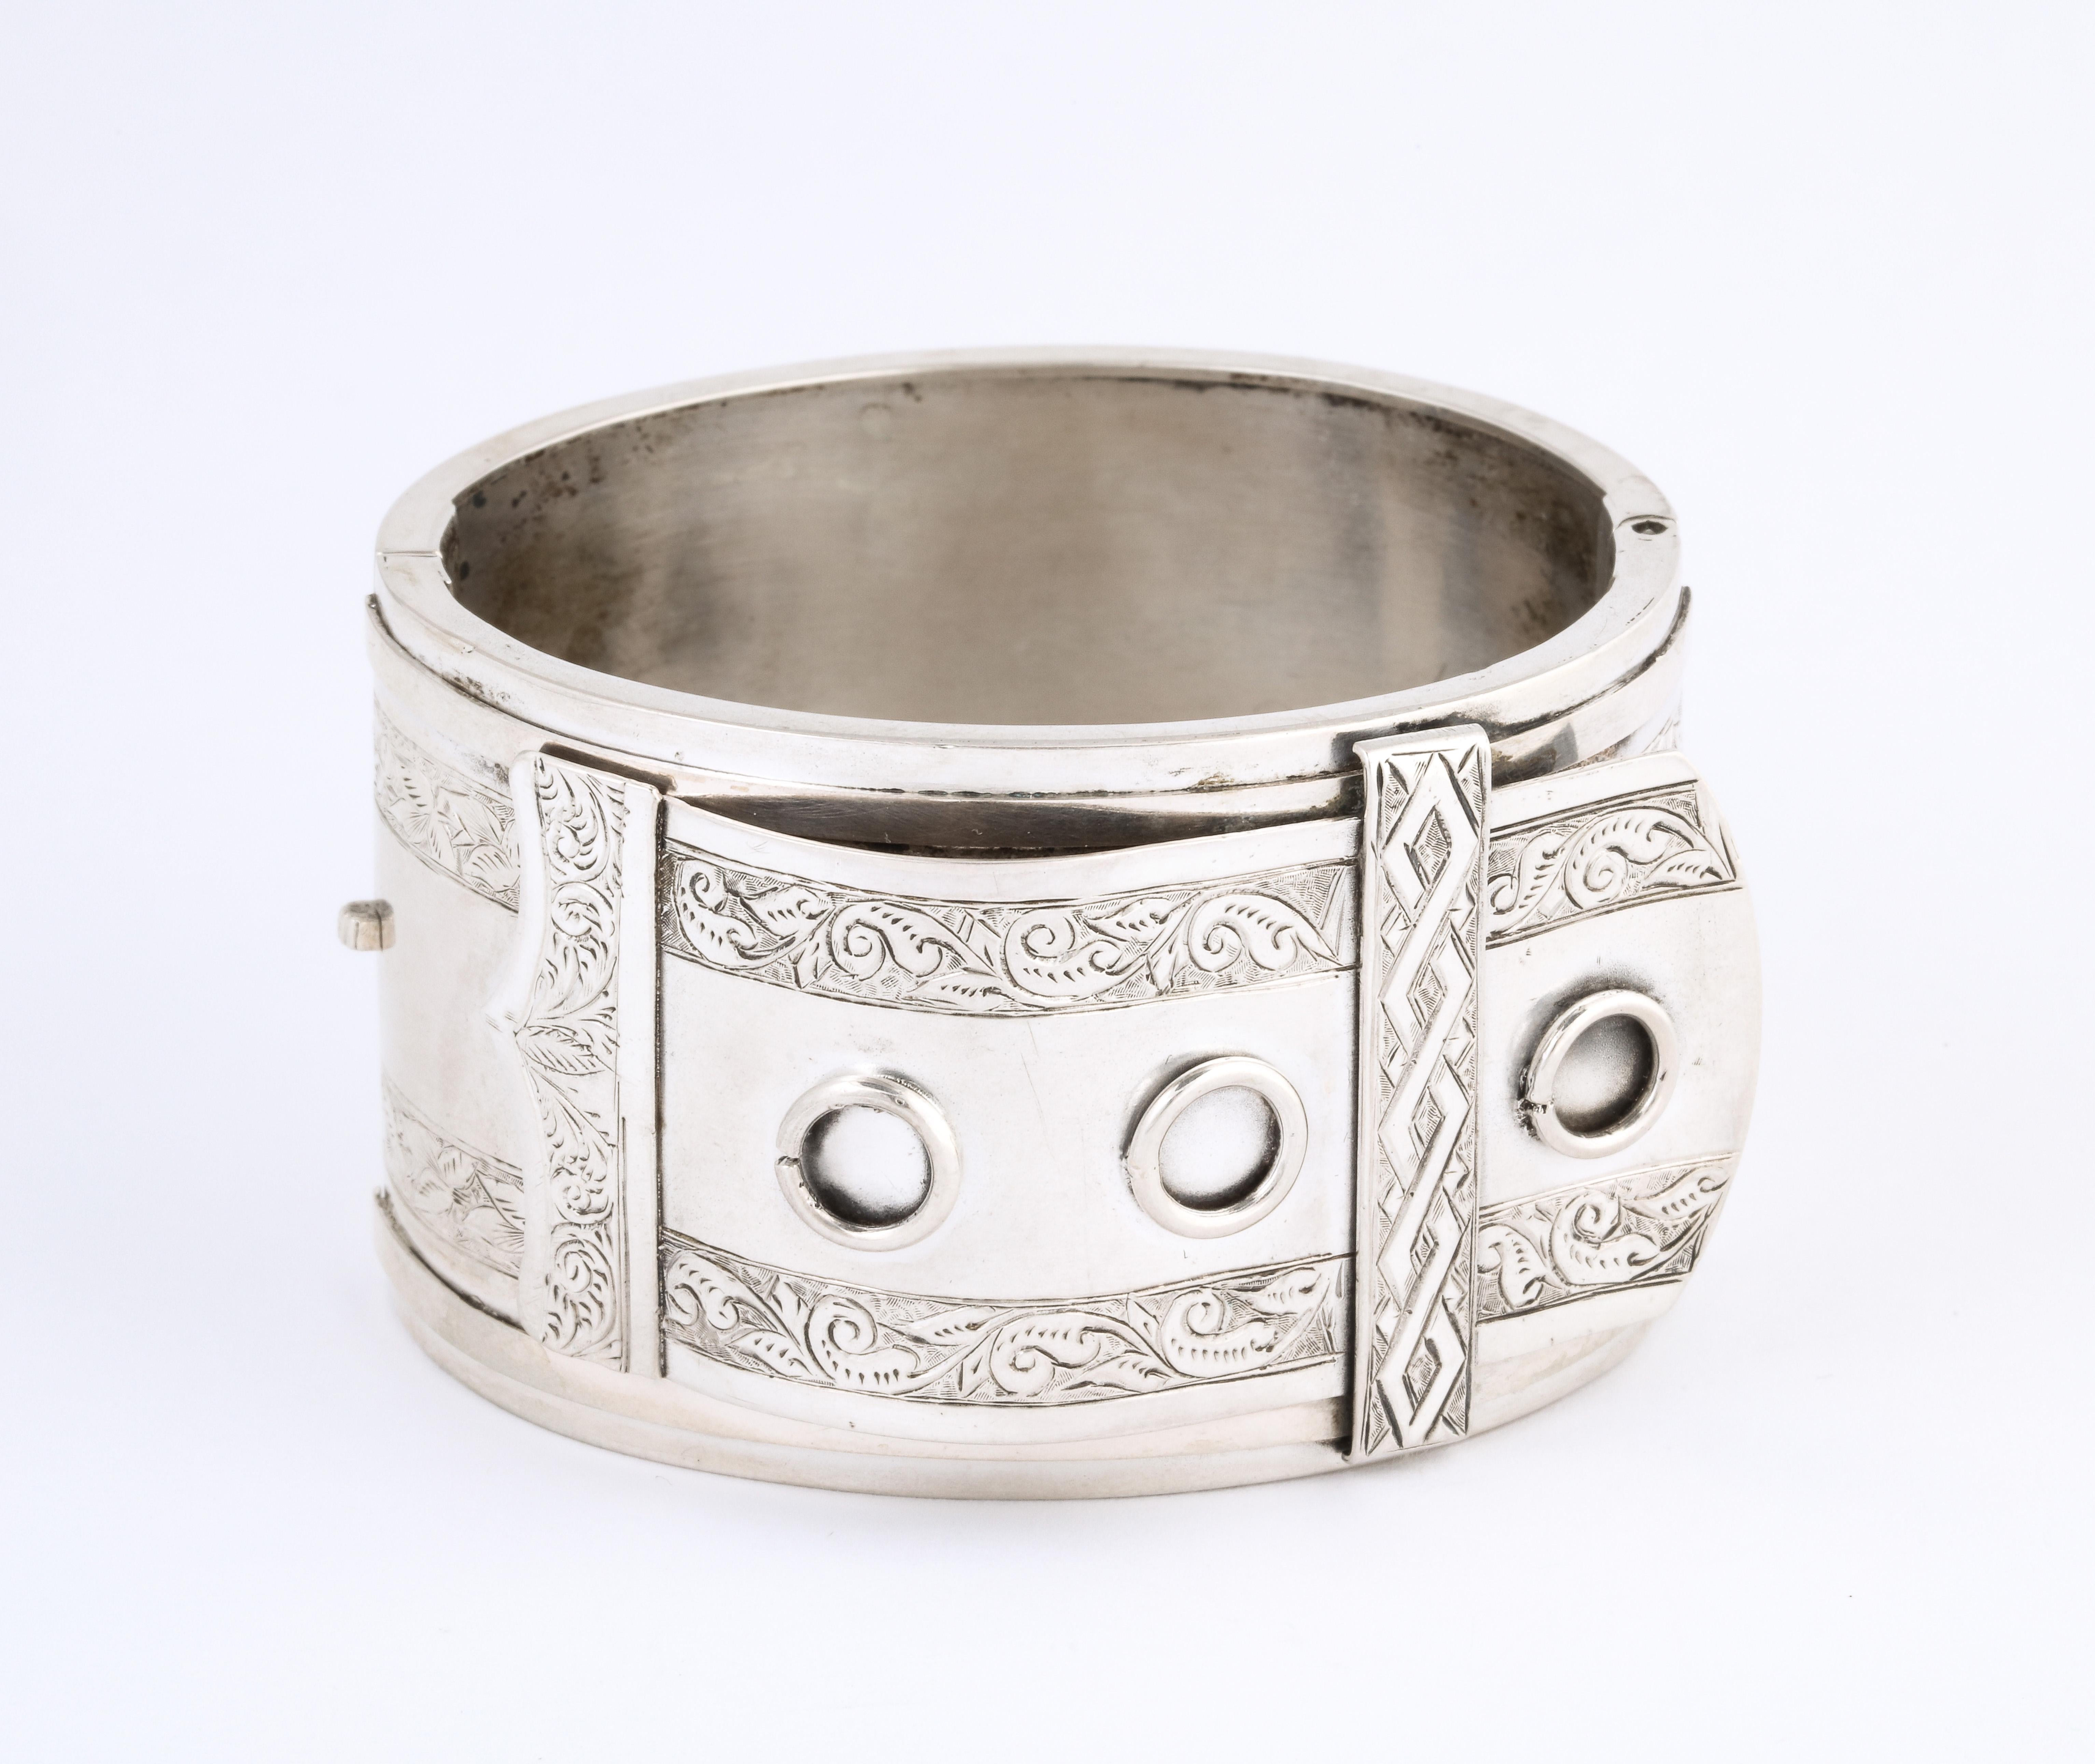 Silver cuff collectors take note of this buckle motif cuff in a scarce design. It is a bold bracelet that measures 2 inches in height. Created in the United Kingdom during the silver jewelry explosion. It dates to 1860-1880. At this time Queen